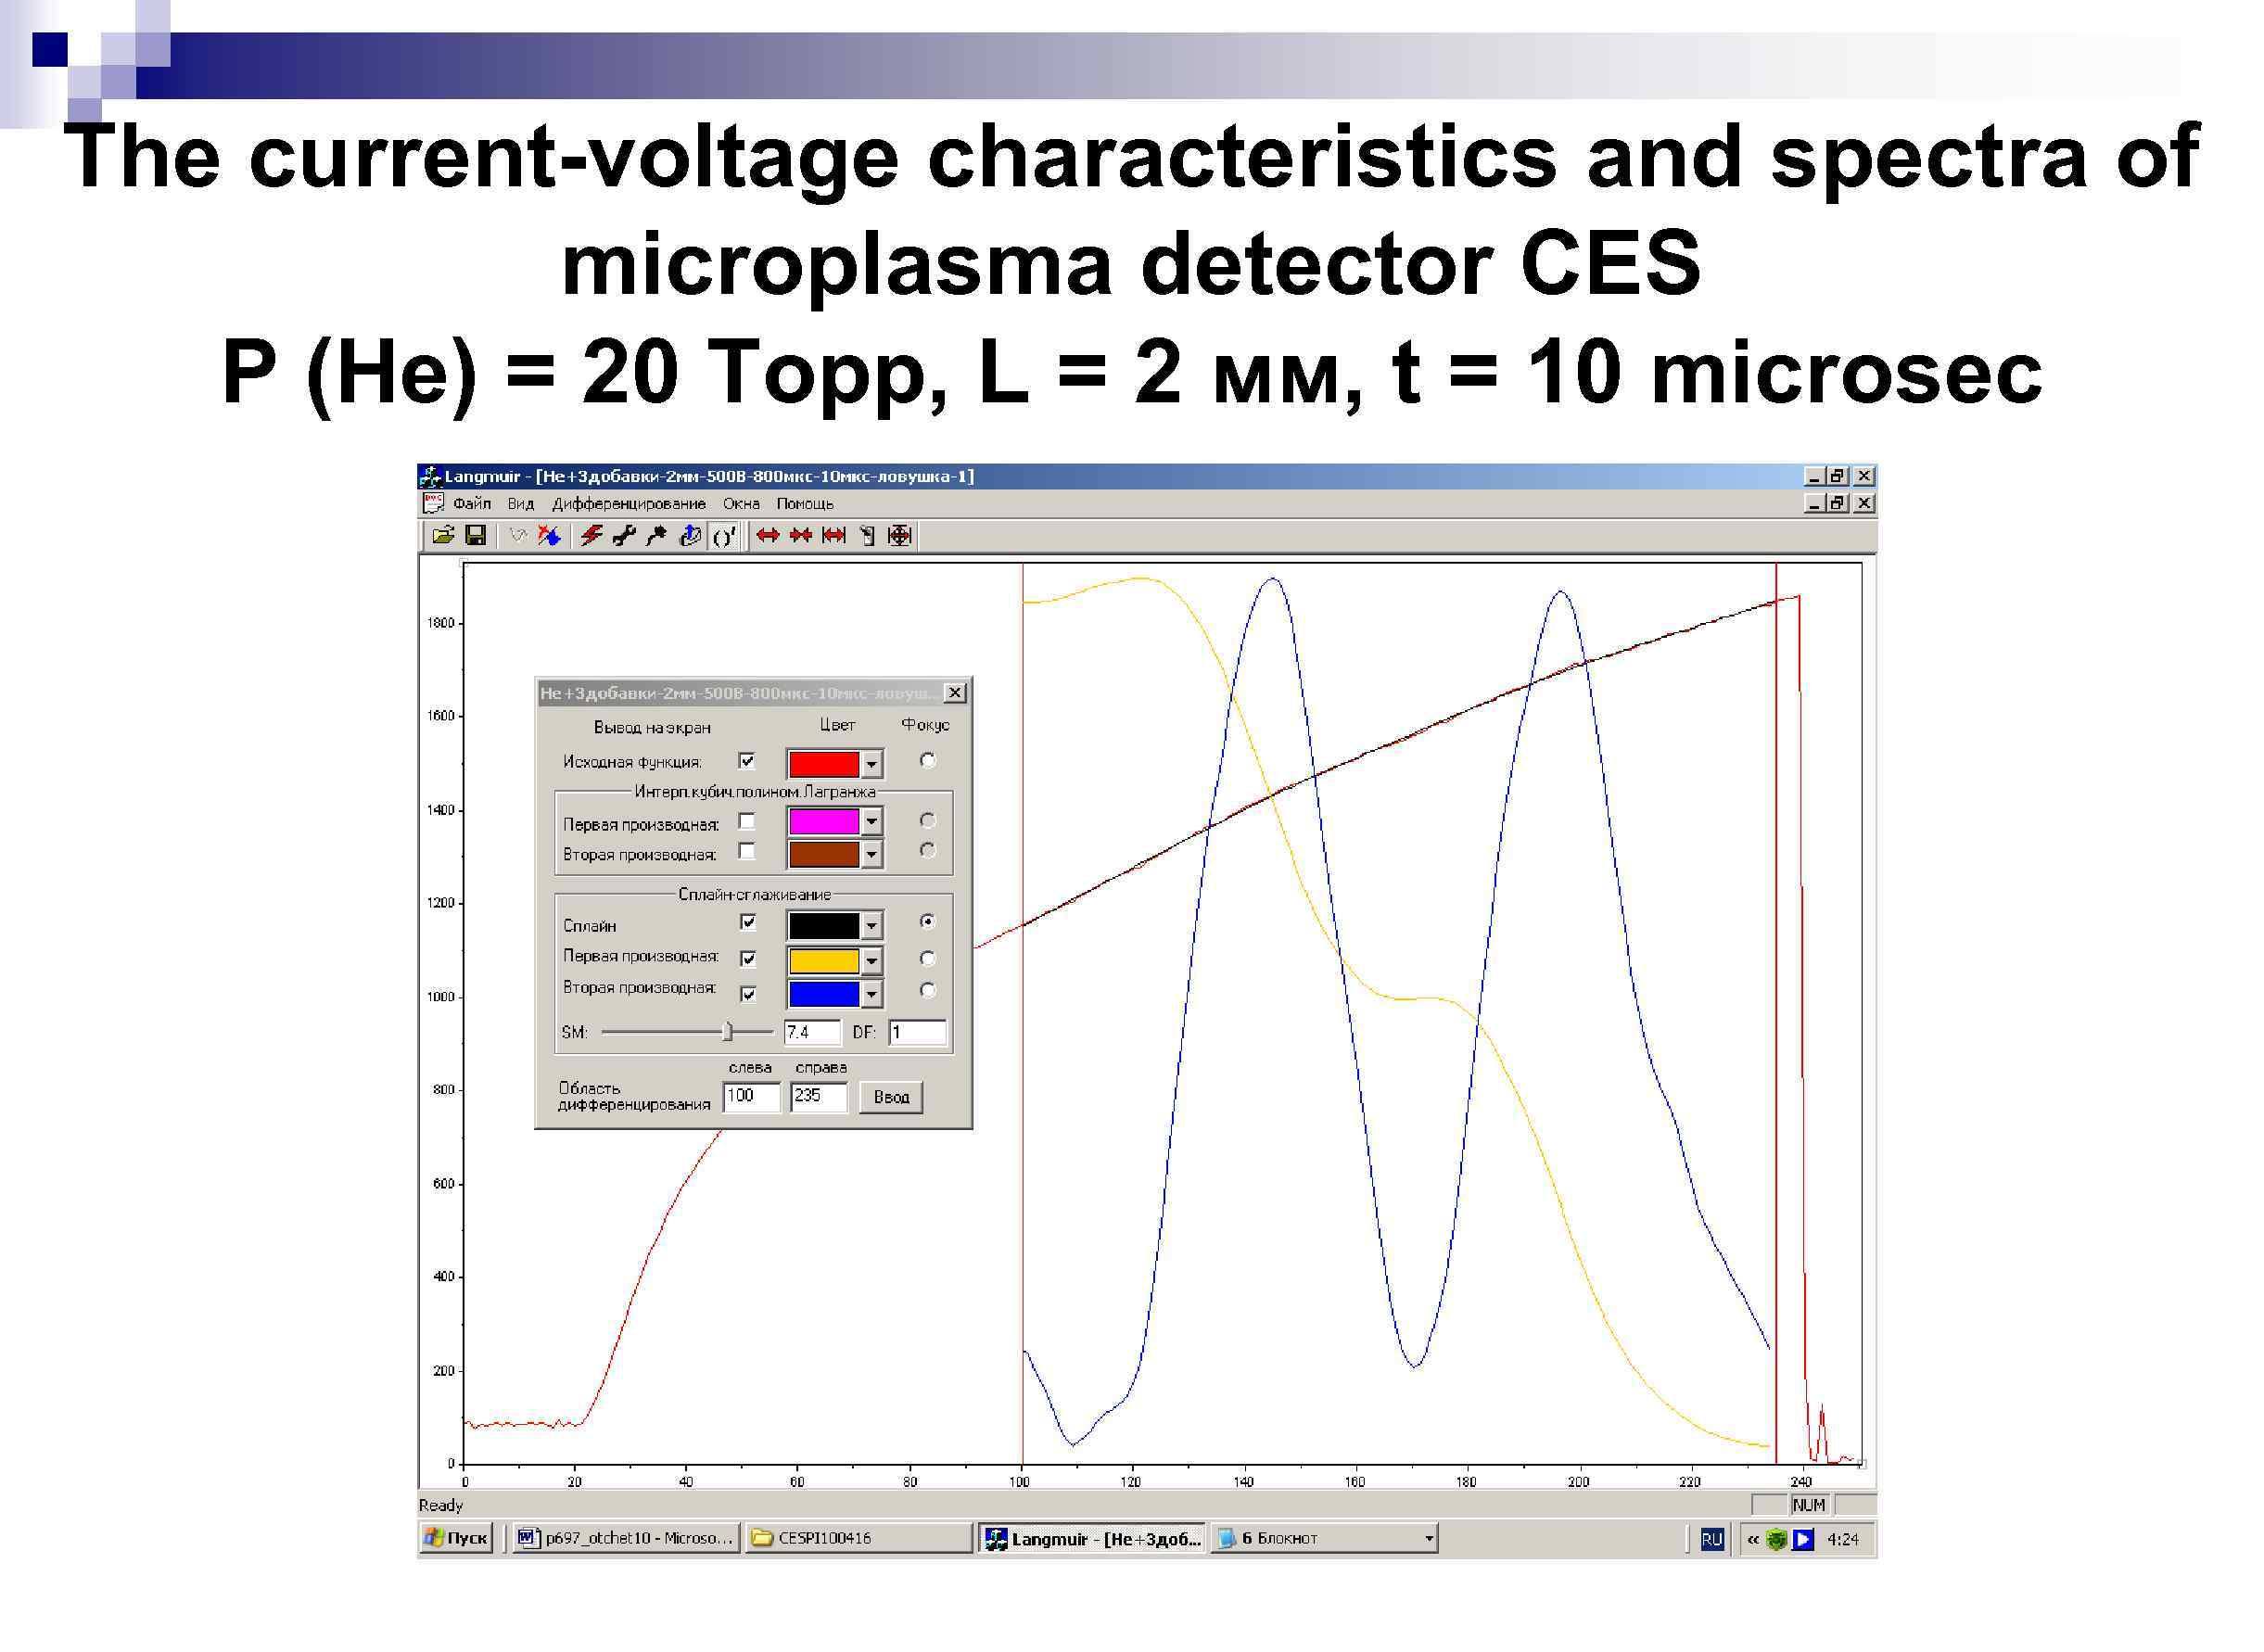 The current-voltage characteristics and spectra of microplasma detector CES P (He) = 20 Торр,